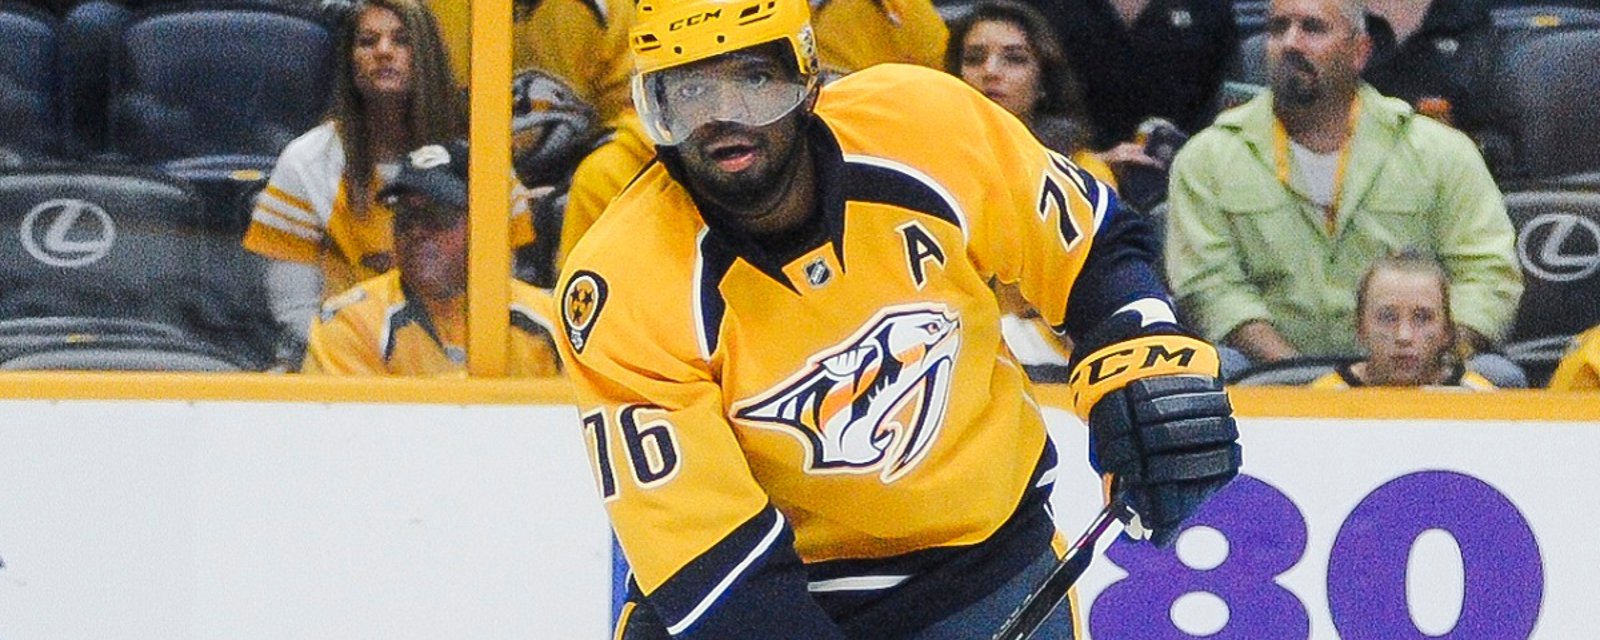 Second straight day of bad news for Subban and the Predators.